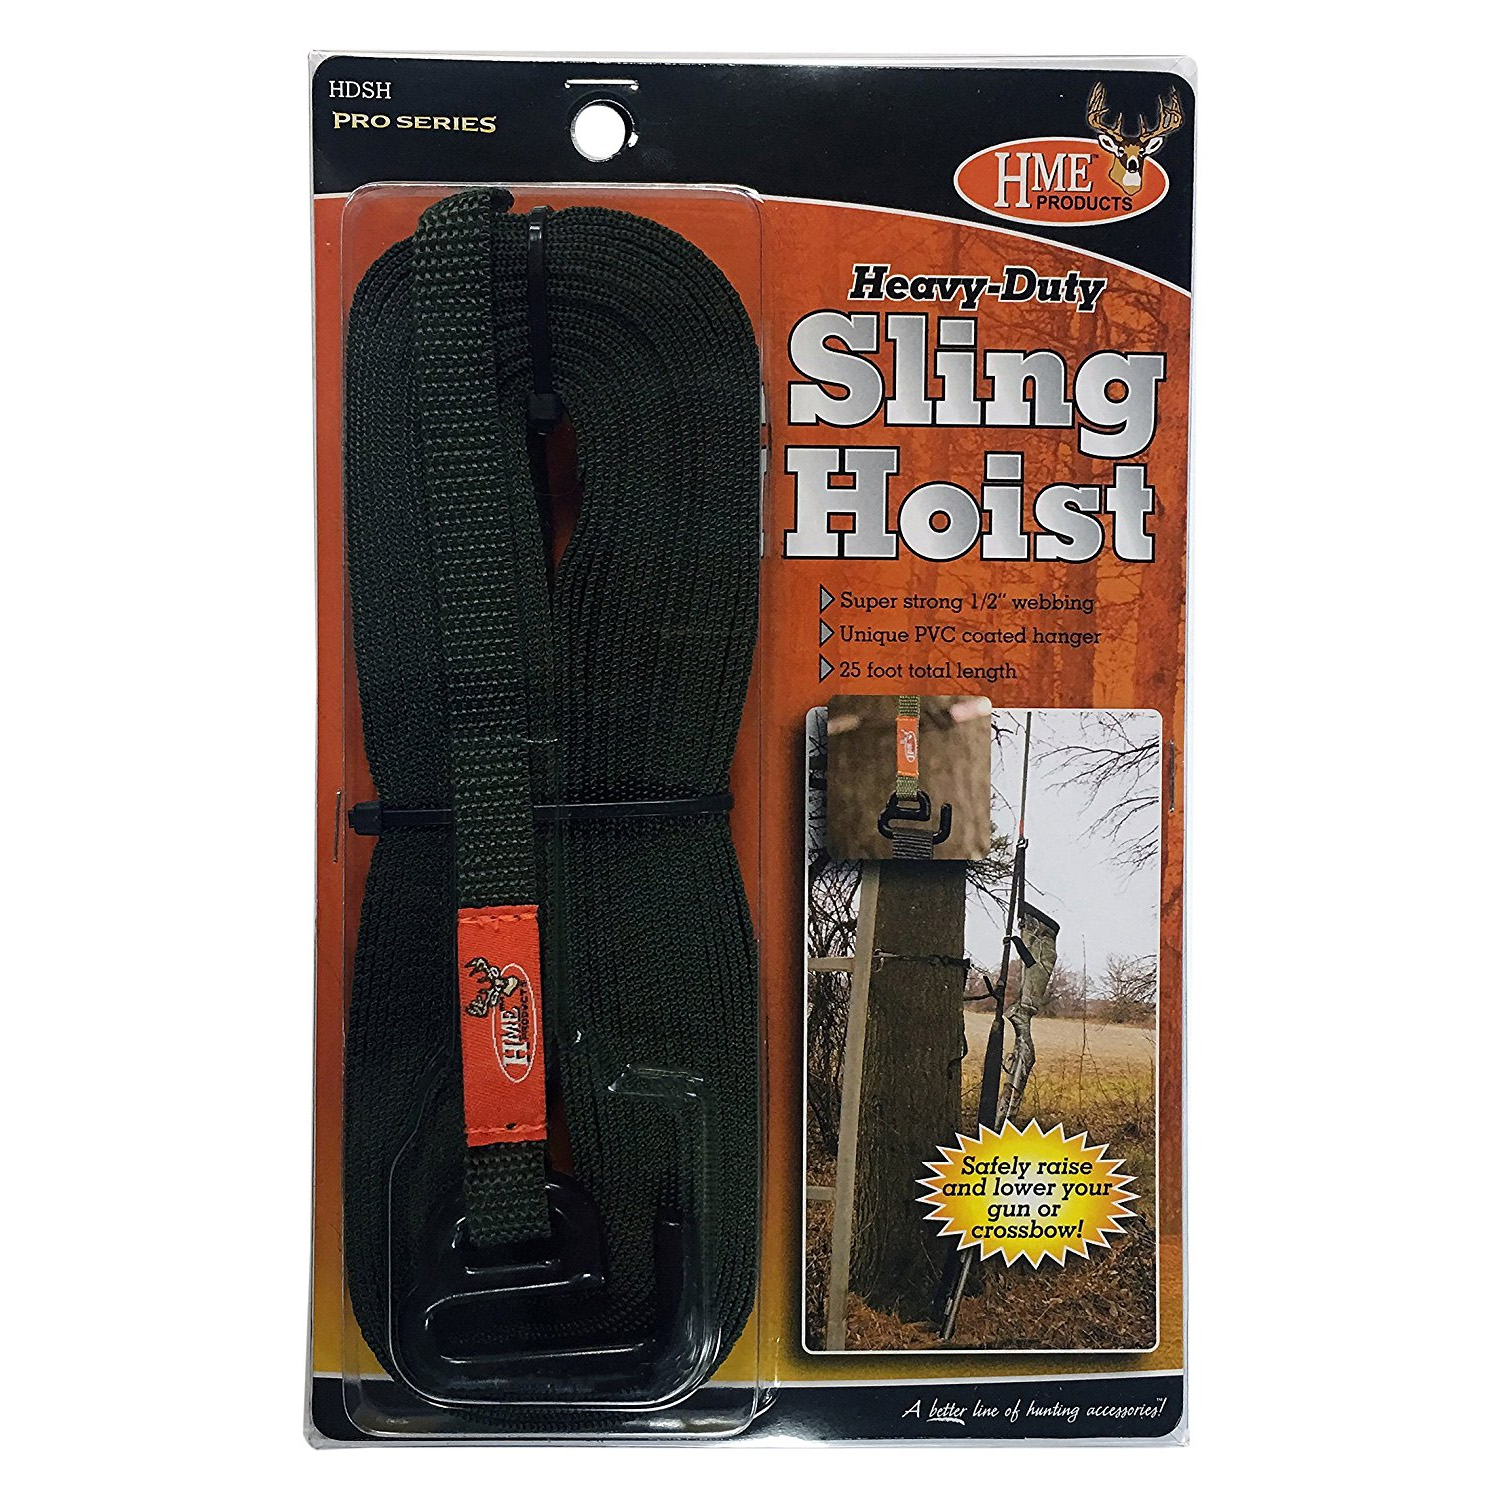 for sale online Hme Products 11551 Gear & Hoist Rope 25 Ft 